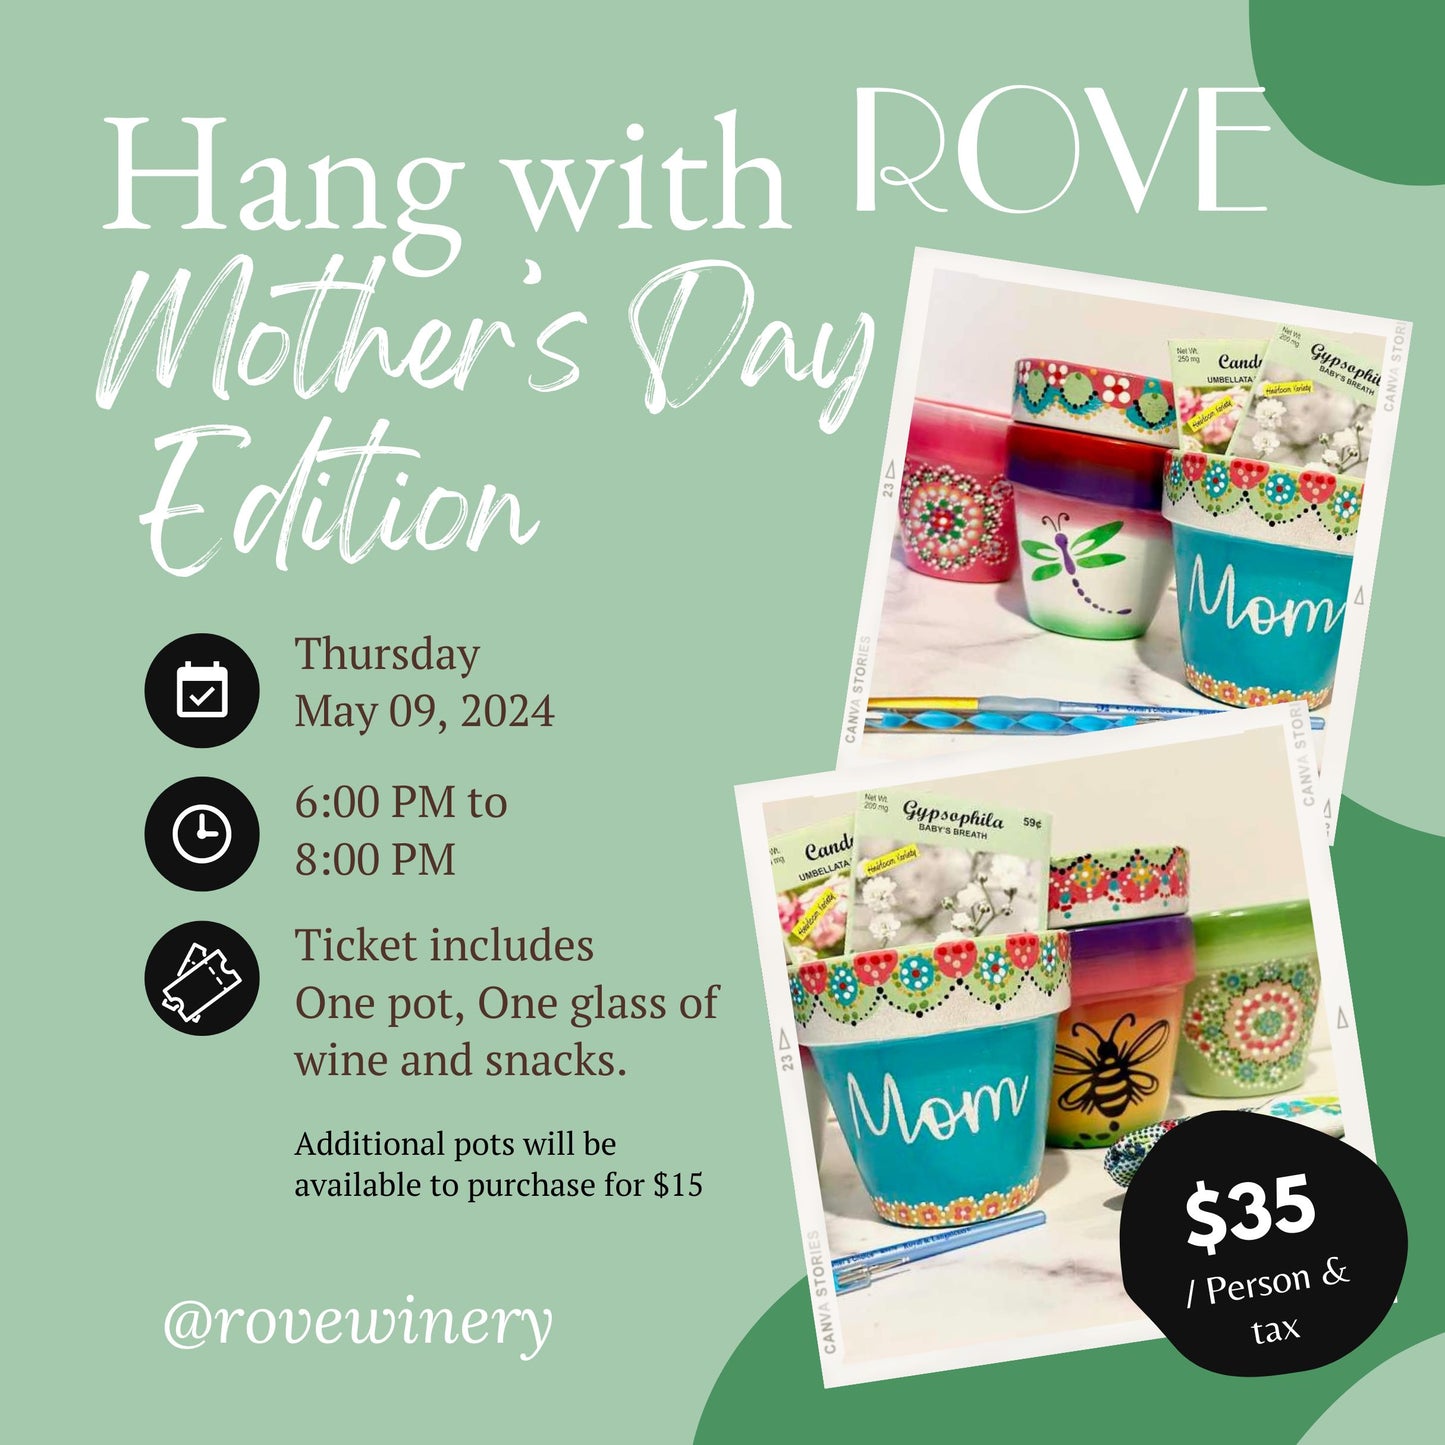 Hang with Rove, Mother's Day Edition